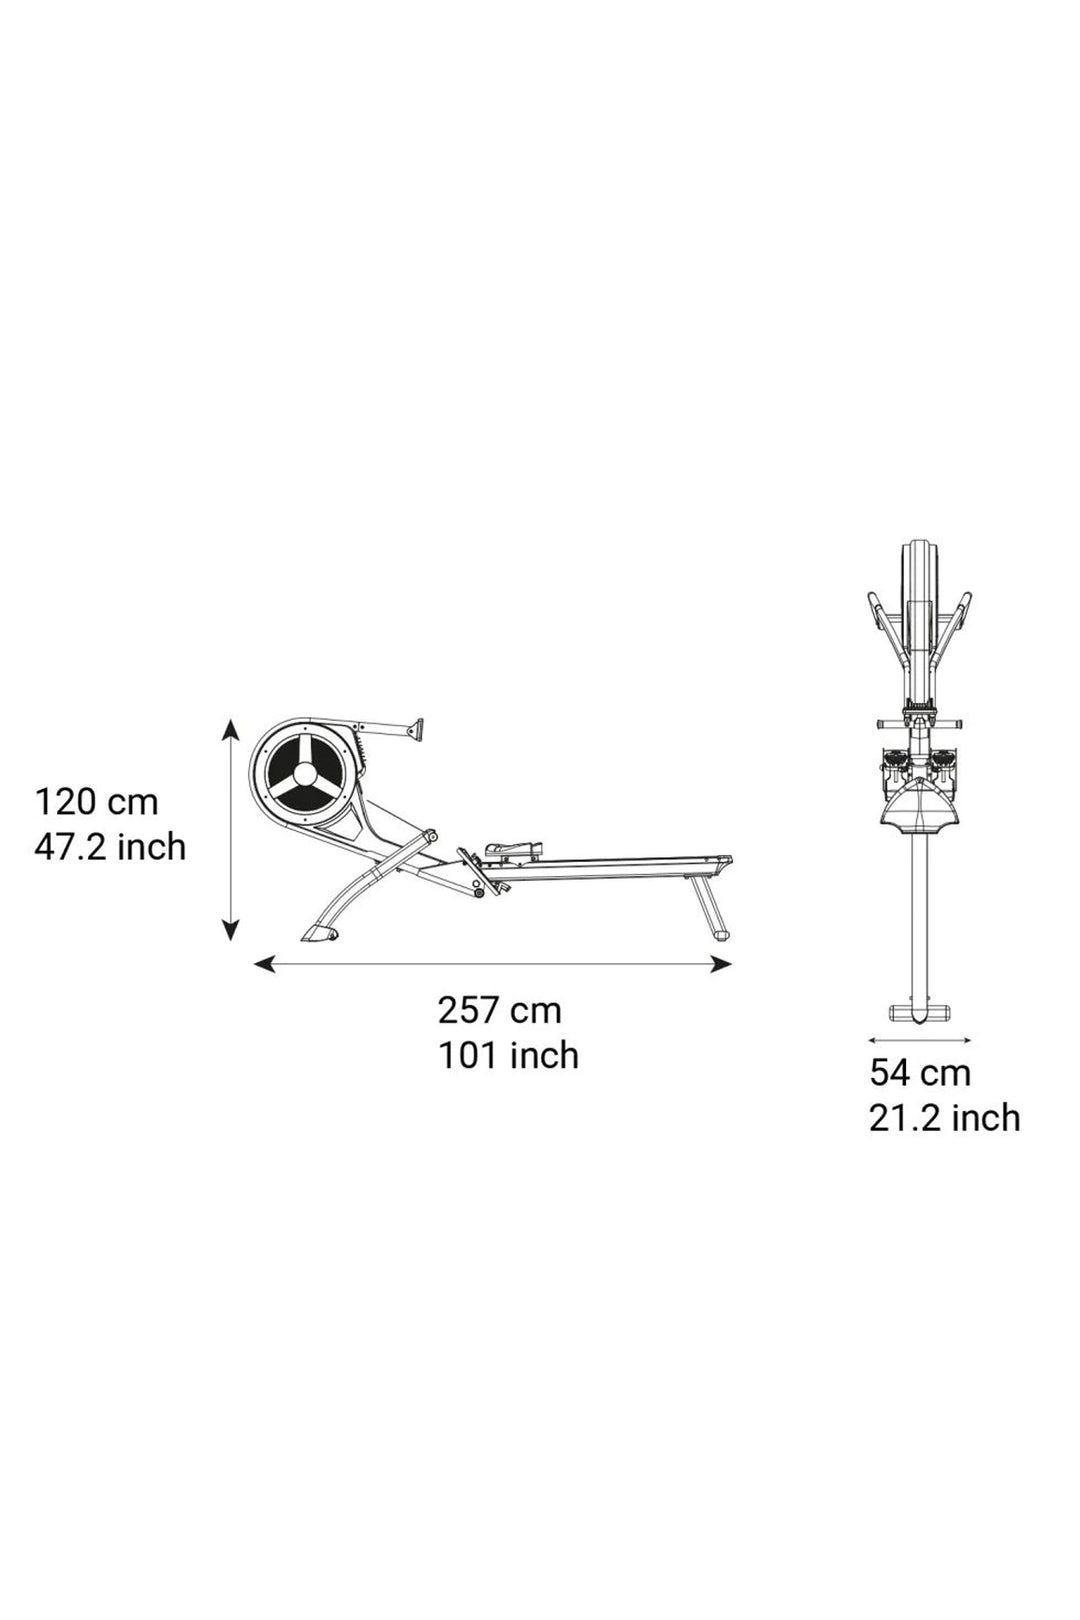 dimensions of air mag rower